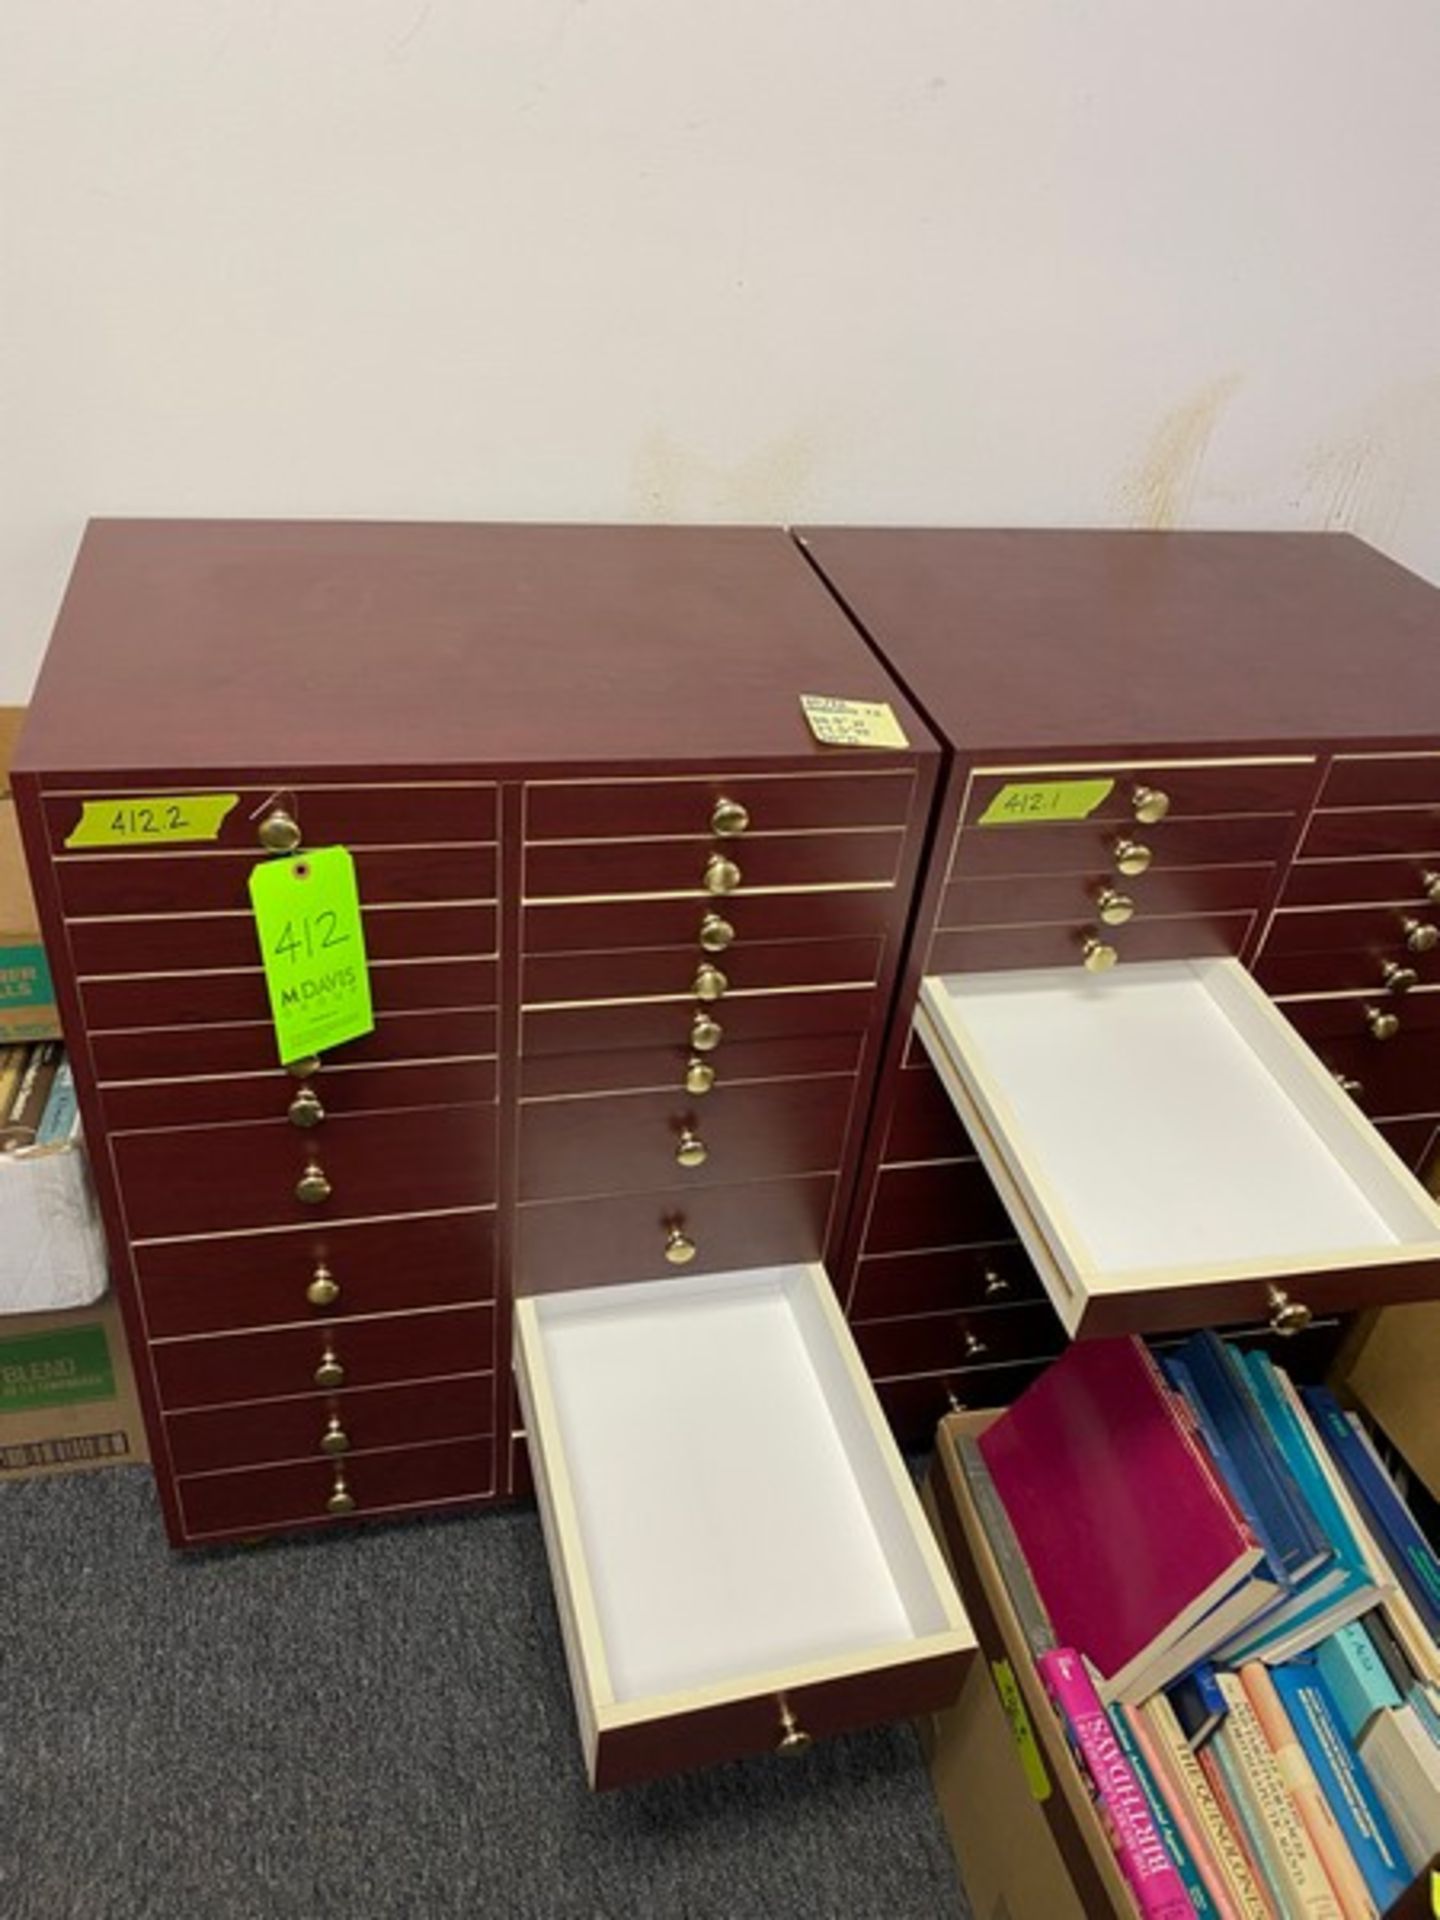 3 total office dark wood cabinets / Brochure Storage units: 2 with 22 drawers each 27.5"Wx20"Dx39. - Image 8 of 12